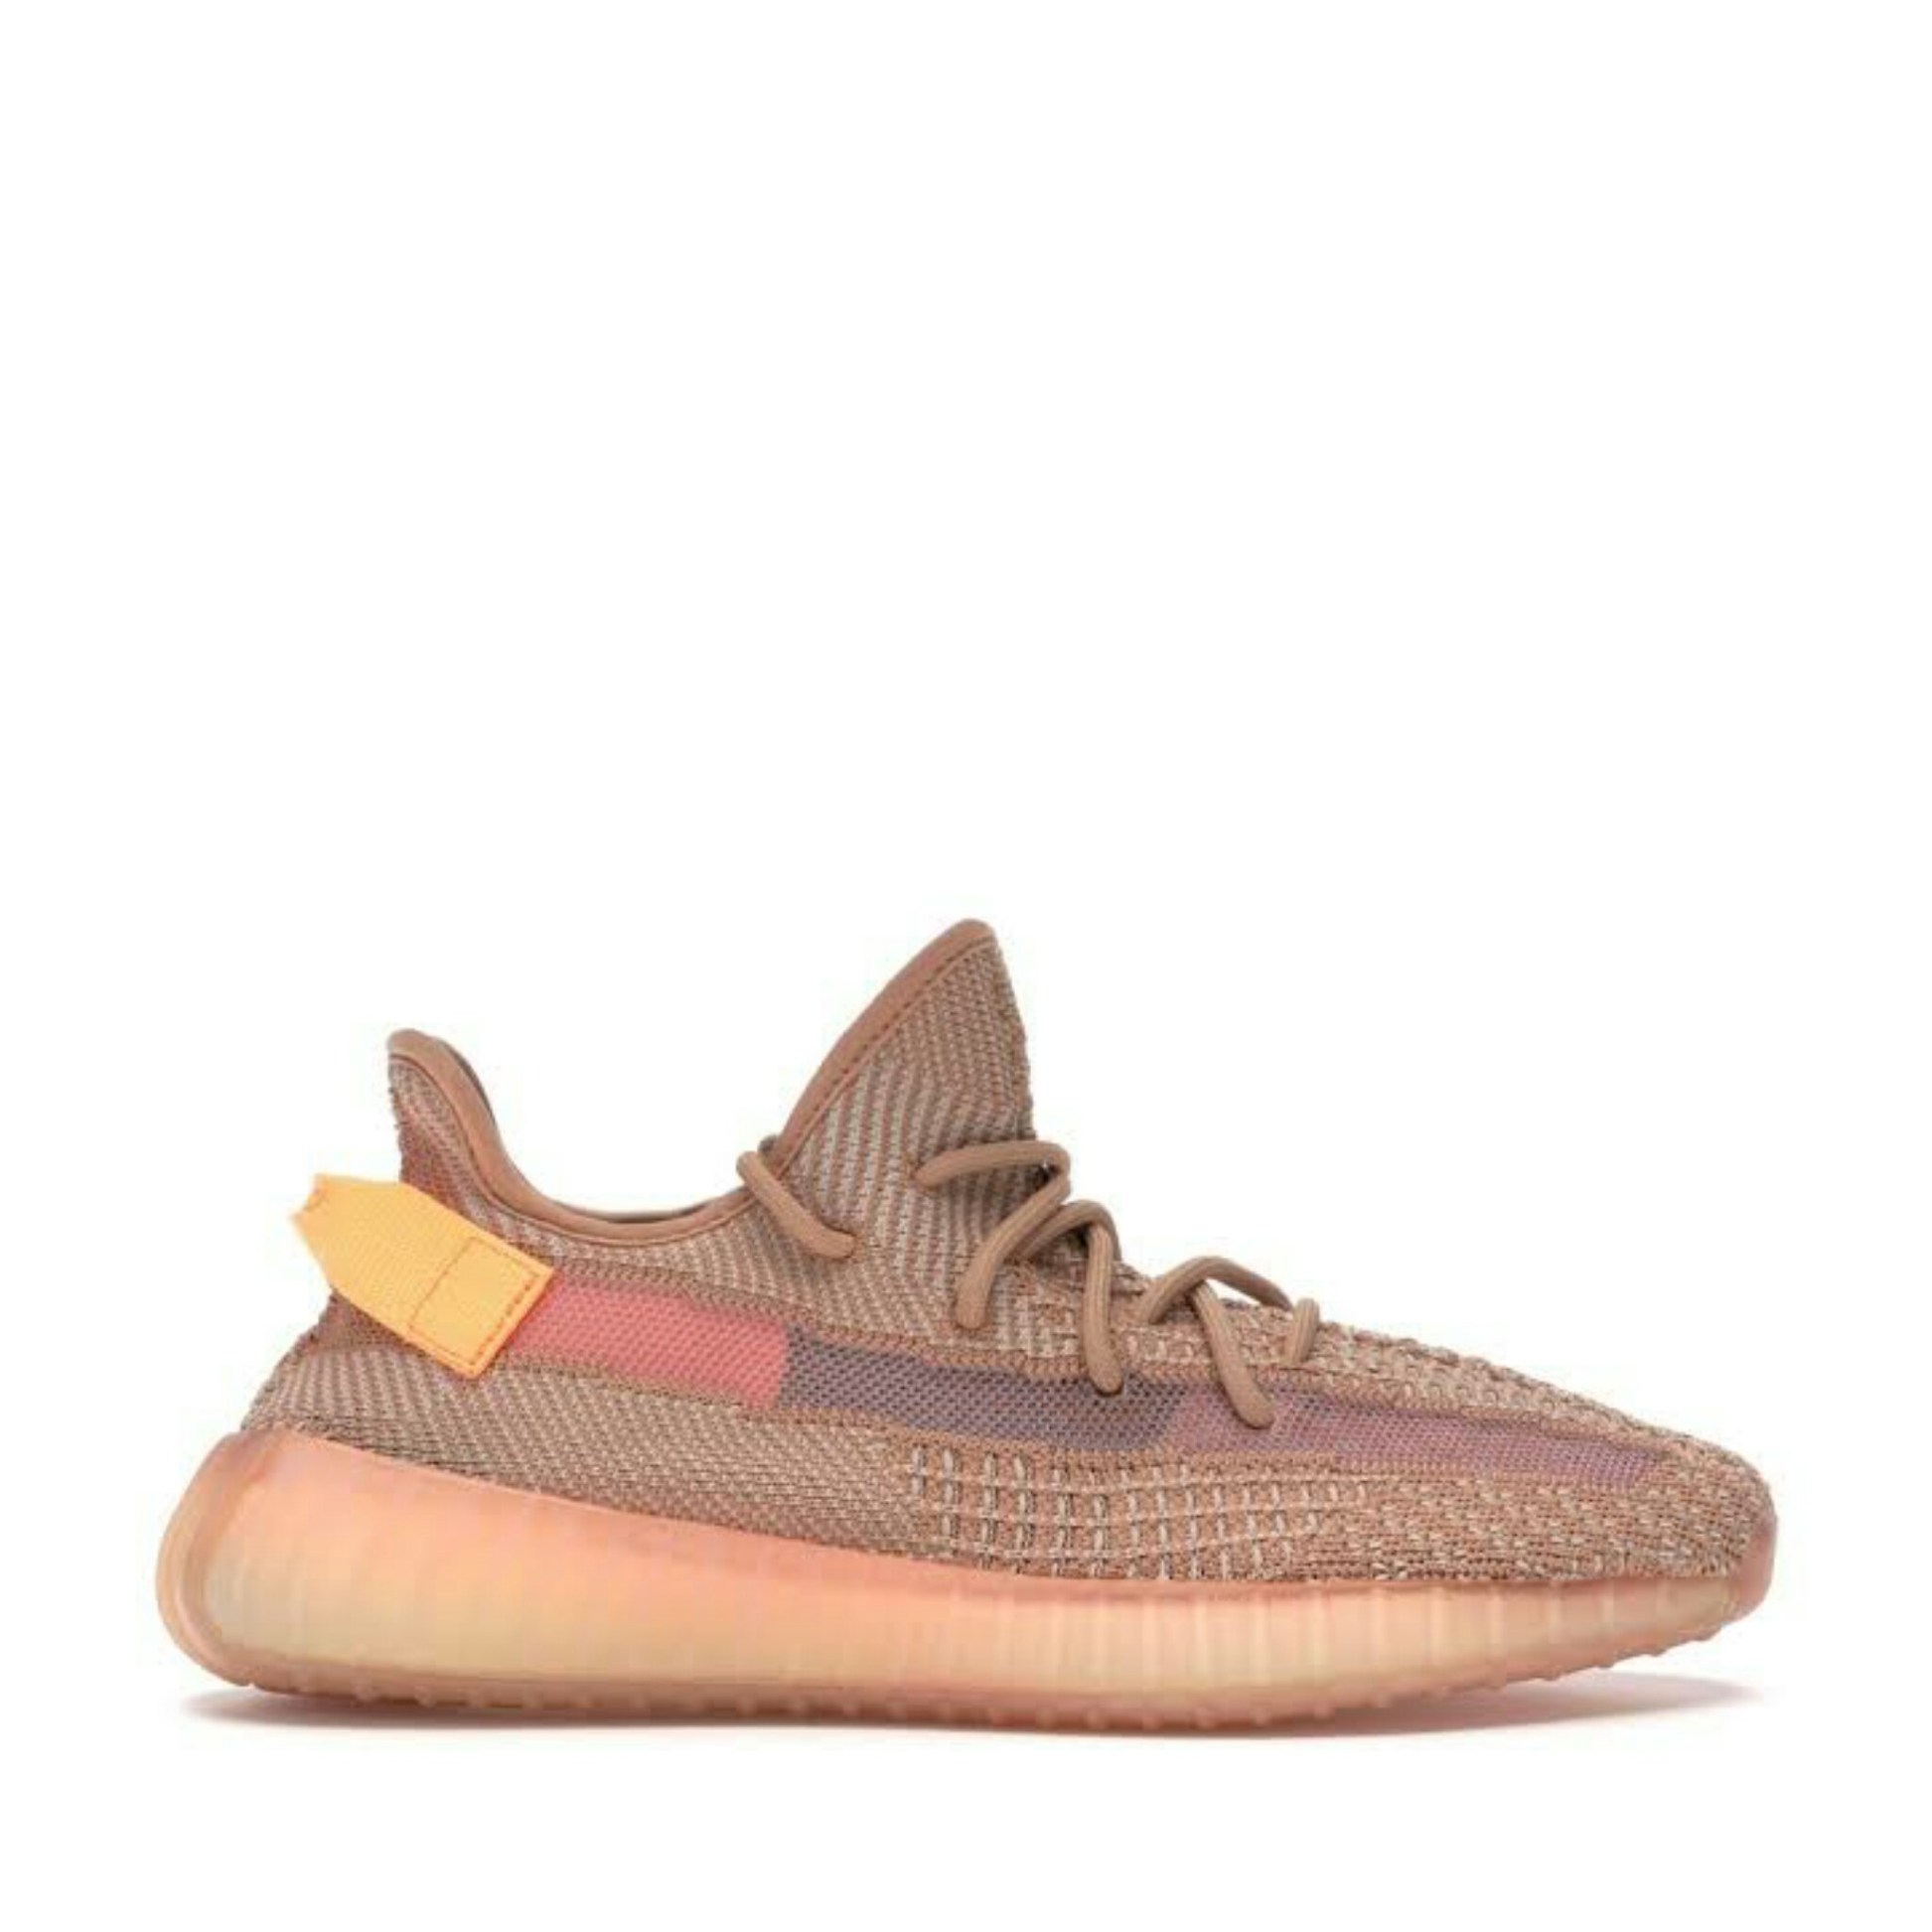 Adidas Yeezy Boost 350 V2 Clay - Buy Shoes Online In Pakistan